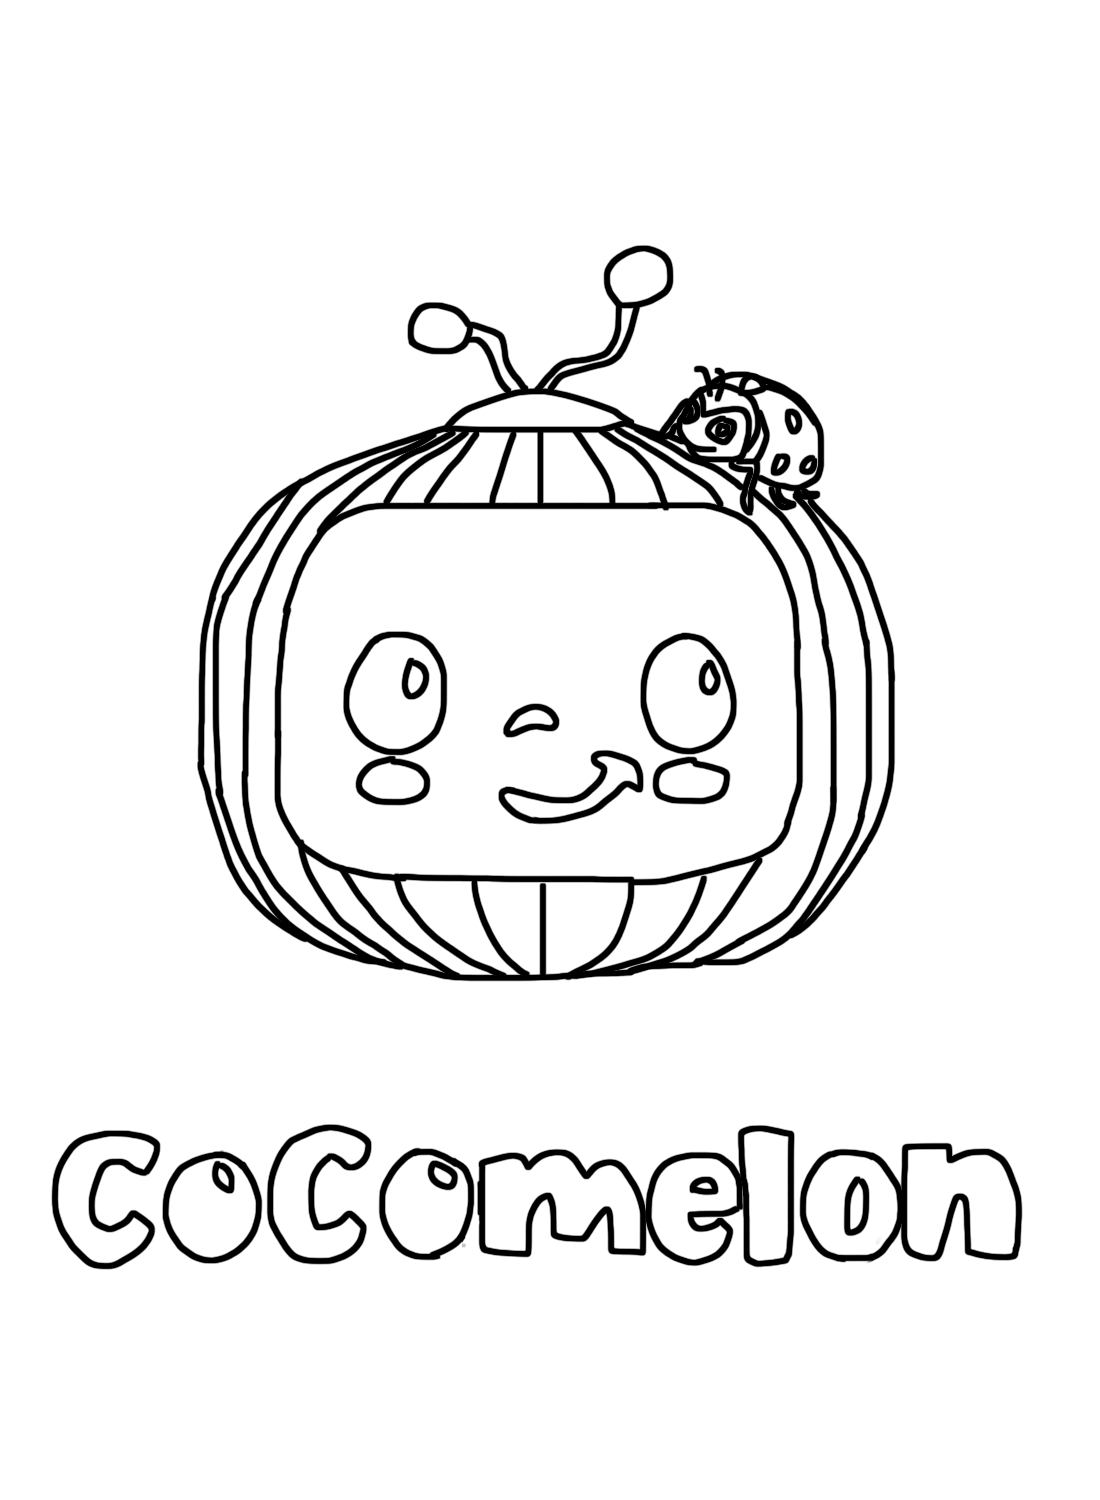 Coloring Pages Cocomelon Drawing from Cocomelon